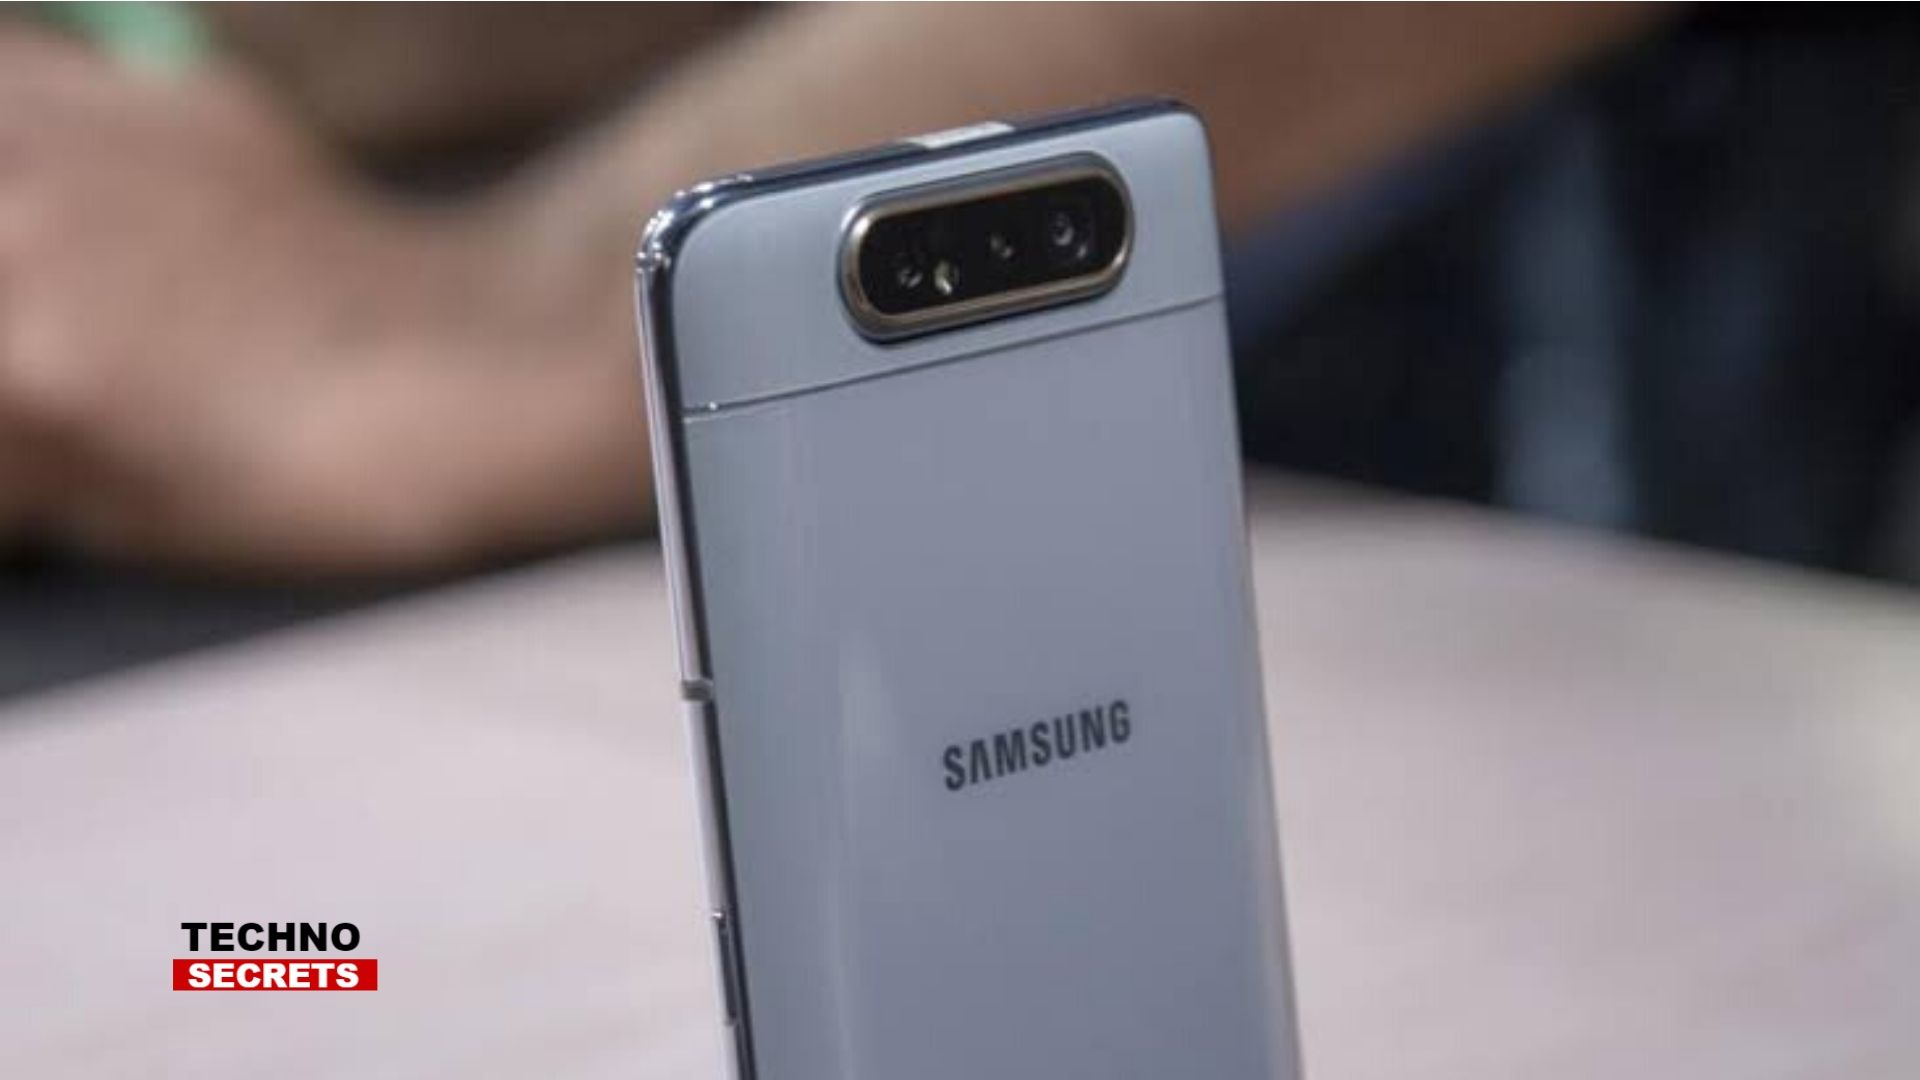 Samsung Galaxy A80 Goes Discounted; Available at Rs. 39,990